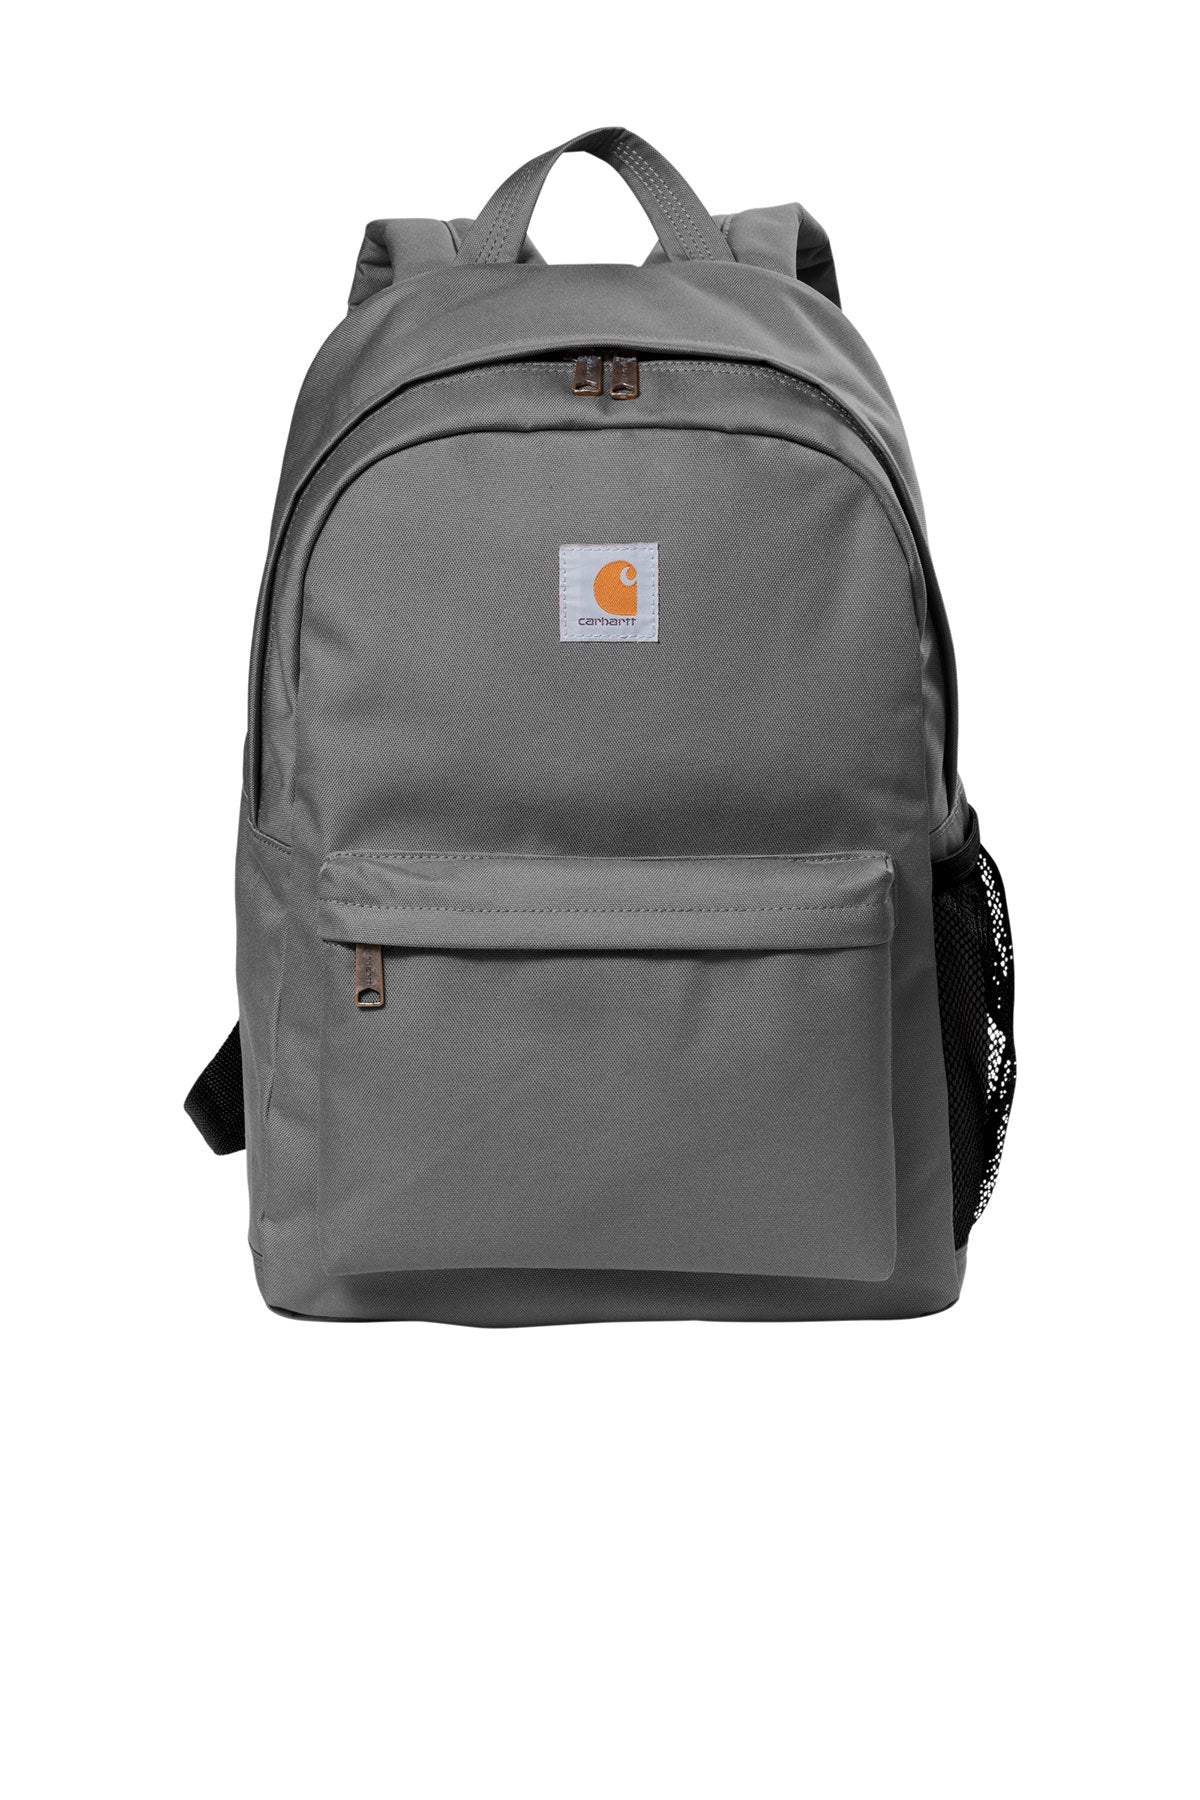 Carhartt® Canvas Backpack with Embroidery